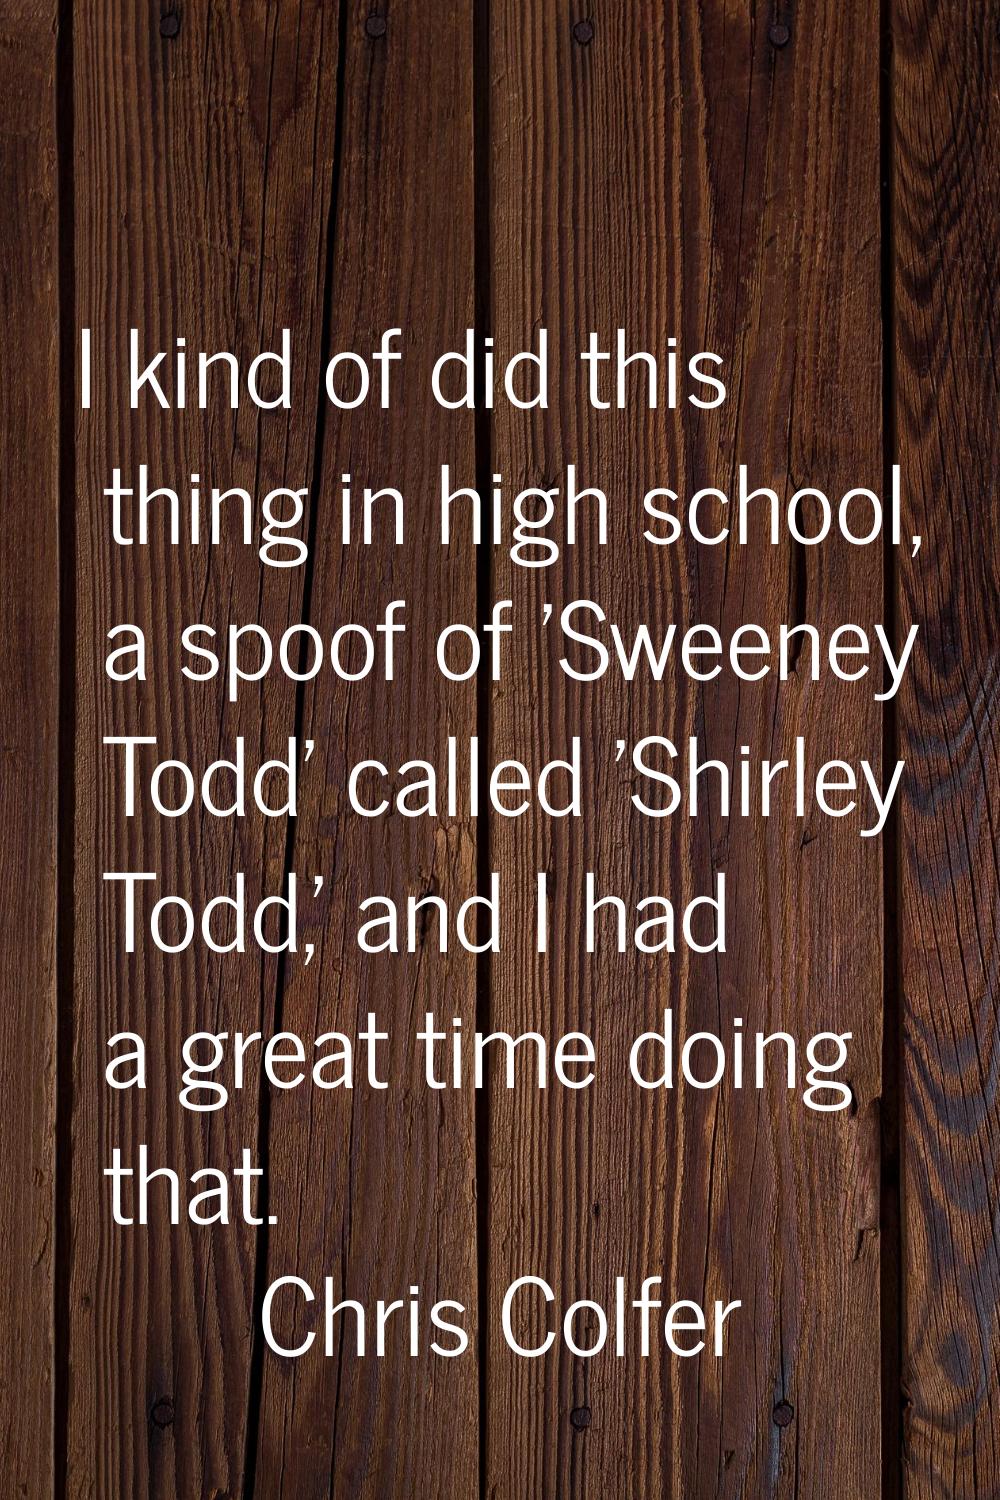 I kind of did this thing in high school, a spoof of 'Sweeney Todd' called 'Shirley Todd,' and I had